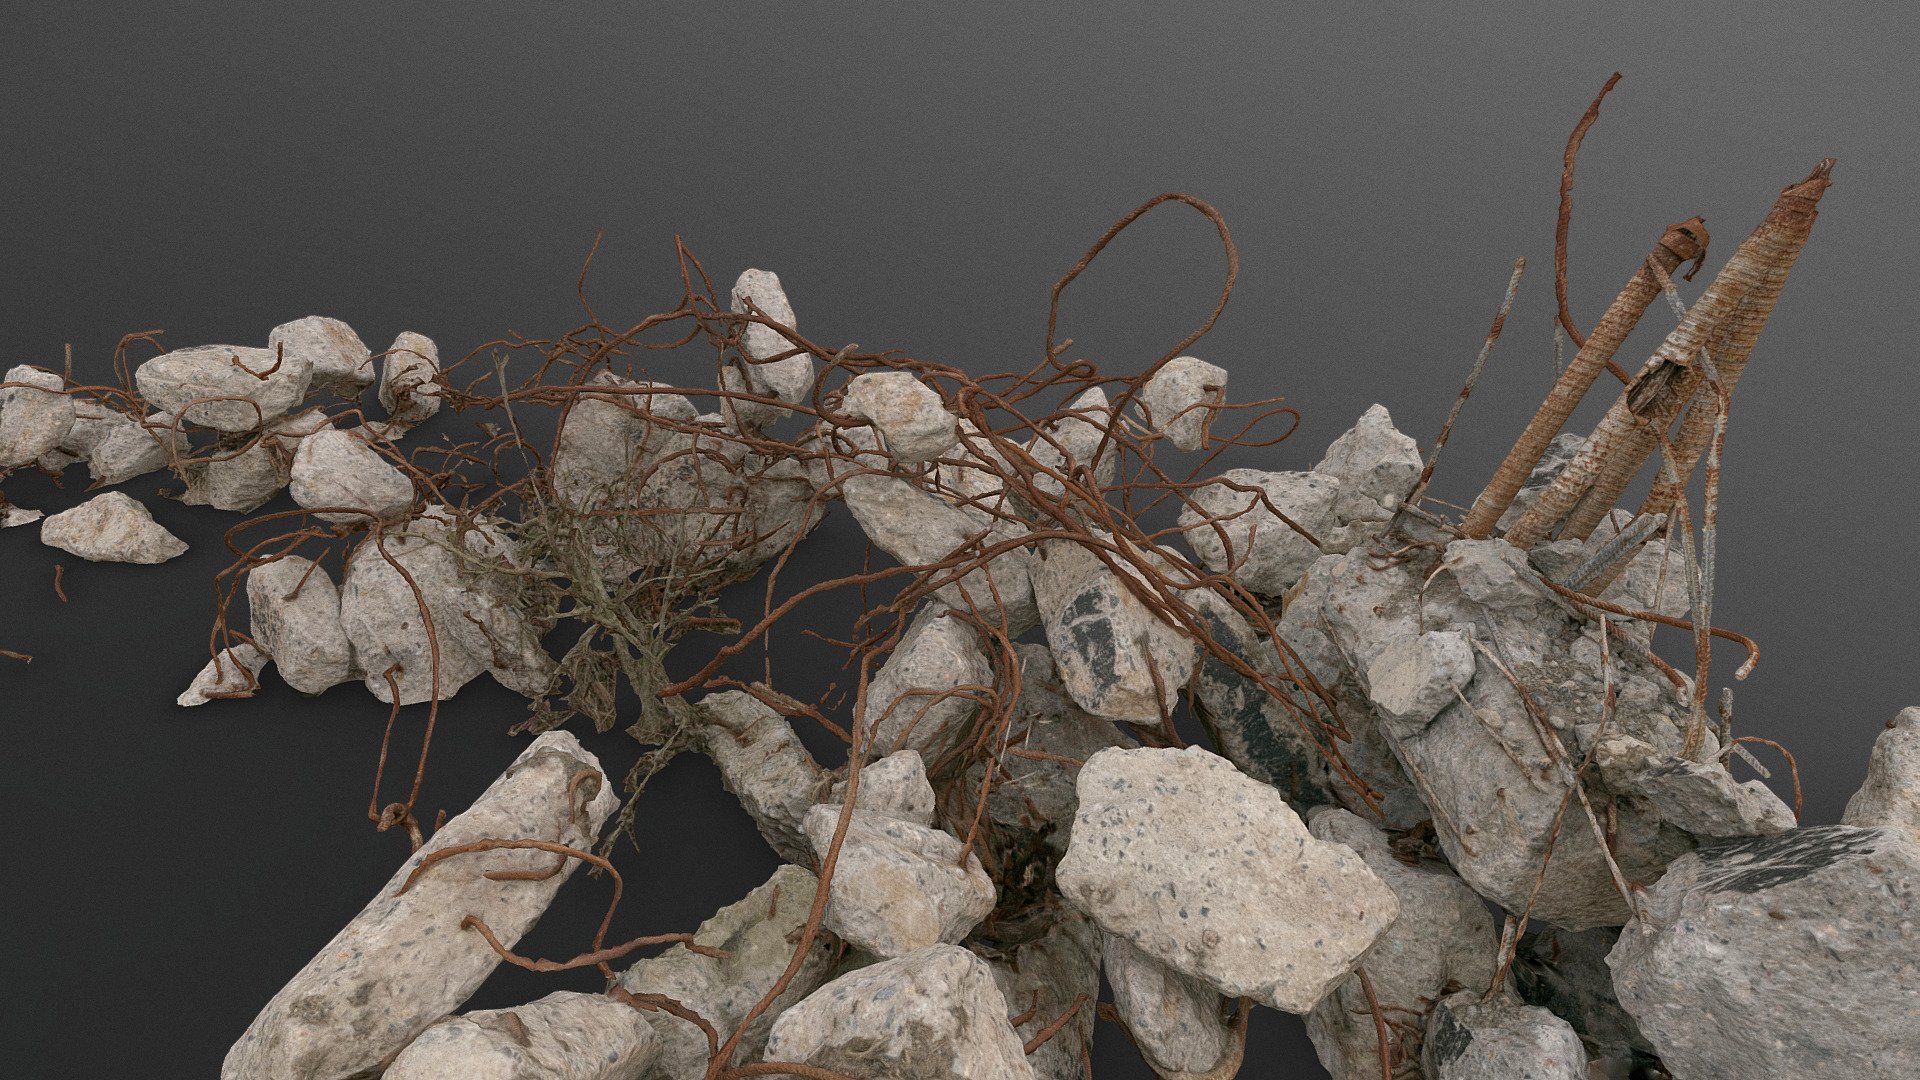 Rusty rusted steel rods bars scrap iron metal pile heap stack junk yard landfill

photogrammetry scan (150x36mp), 4x8k textures + hd normals - Rusty steel scrap rods and concrete - Buy Royalty Free 3D model by axonite 3d model